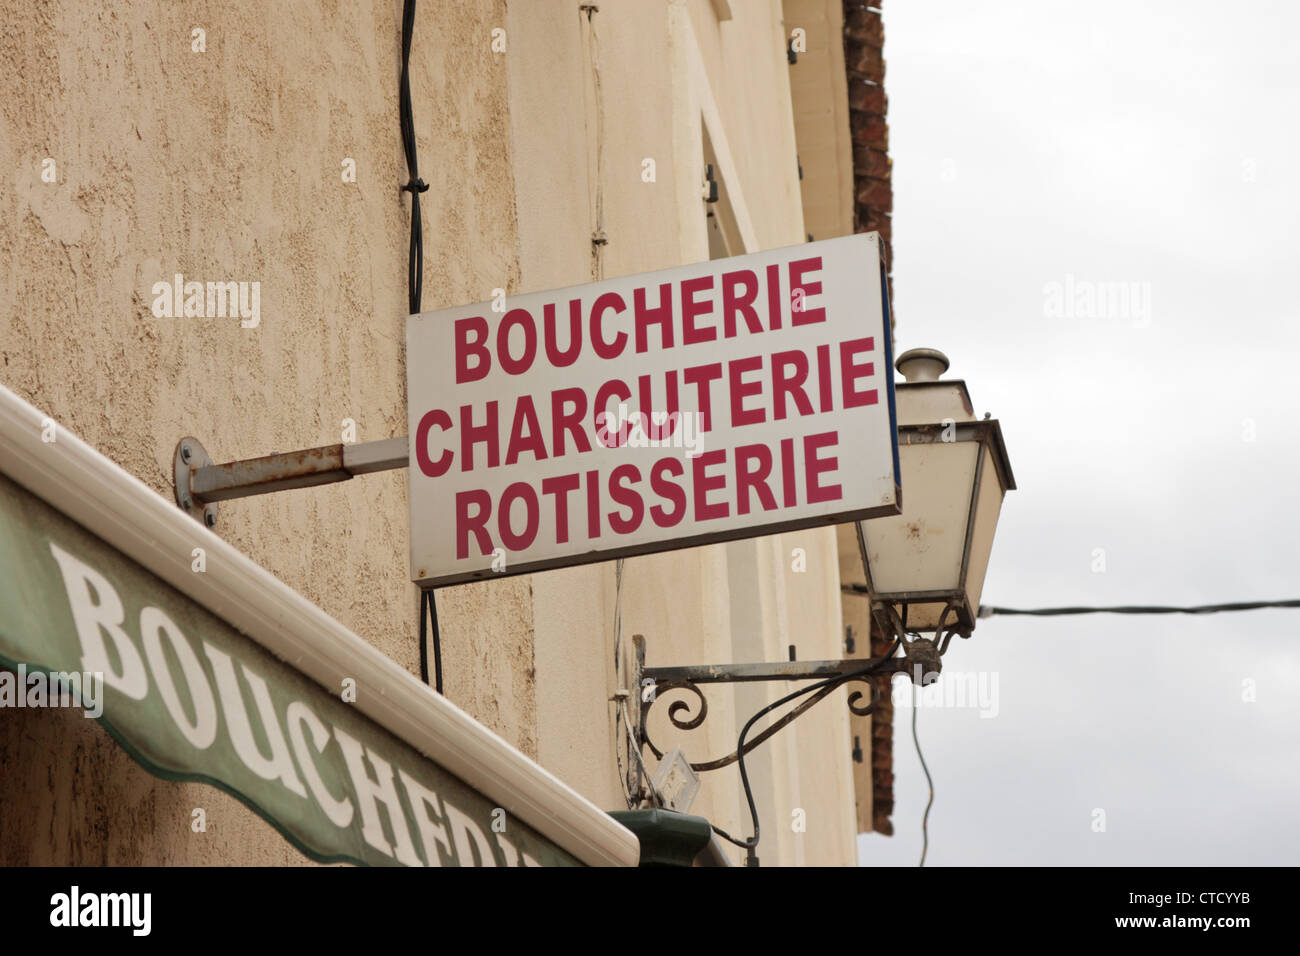 A Boucherie Charcuterie Rotisserie sign outside a butchers in the village of Gruissan Languedoc-Roussillon France Stock Photo